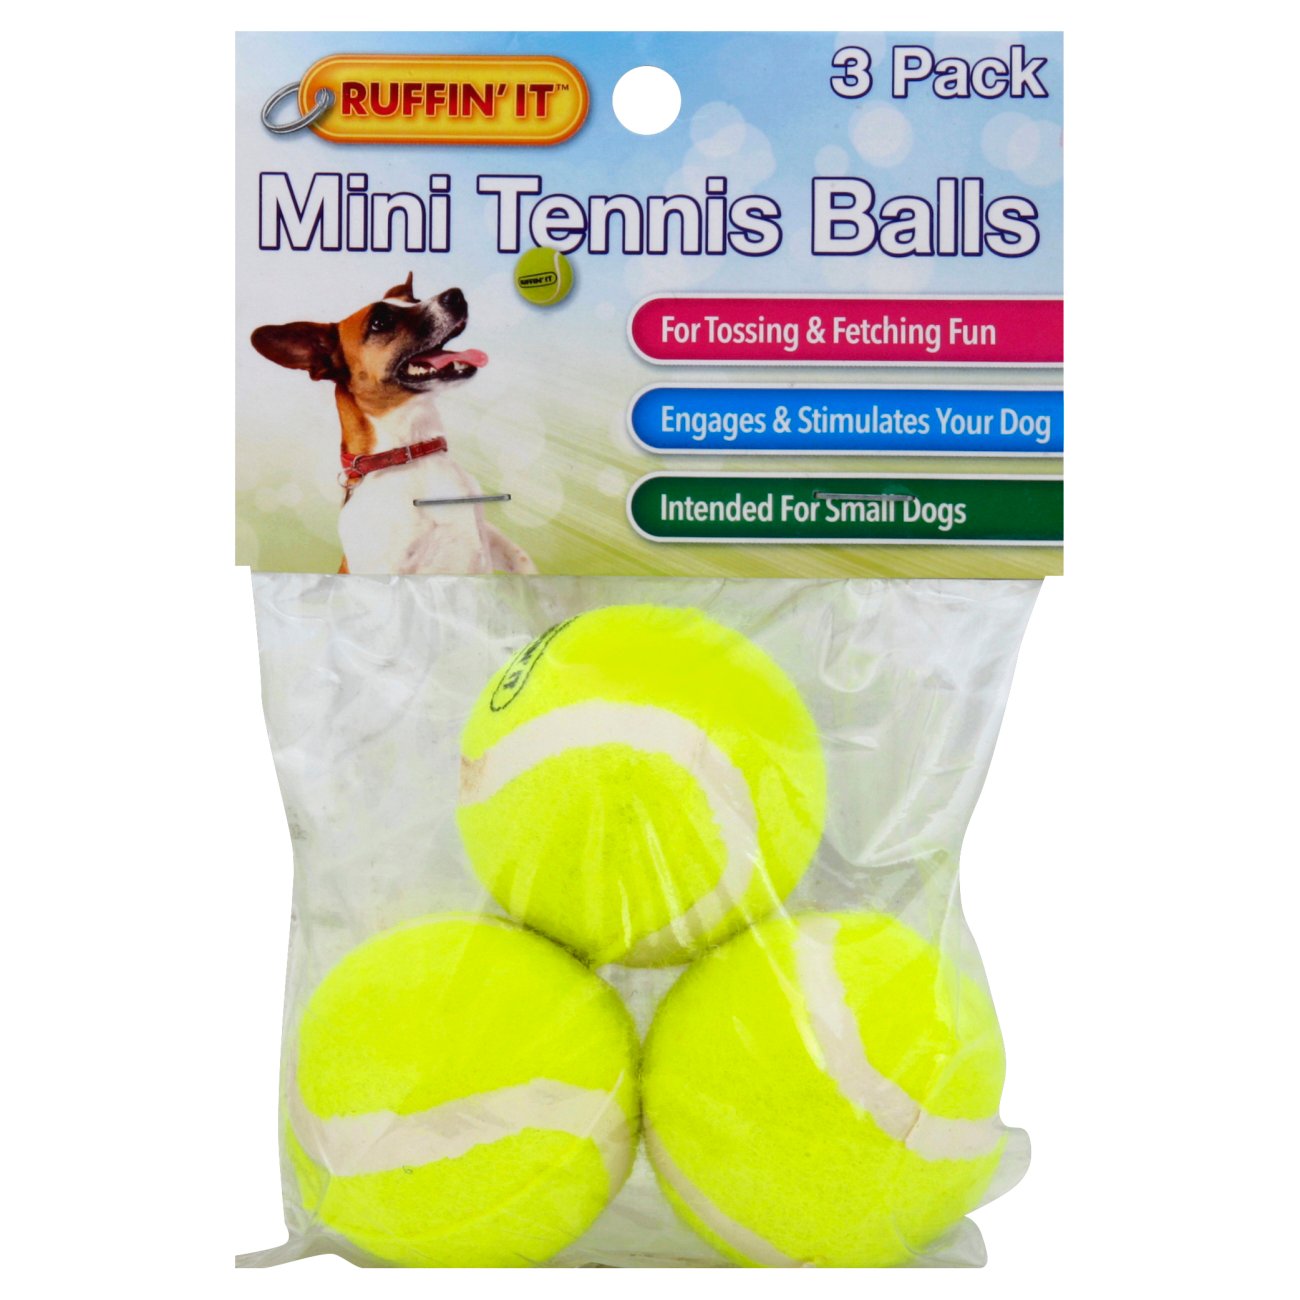 Tennis Balls For Dogs Toy Ball C2X9 E0S7 M6N4 